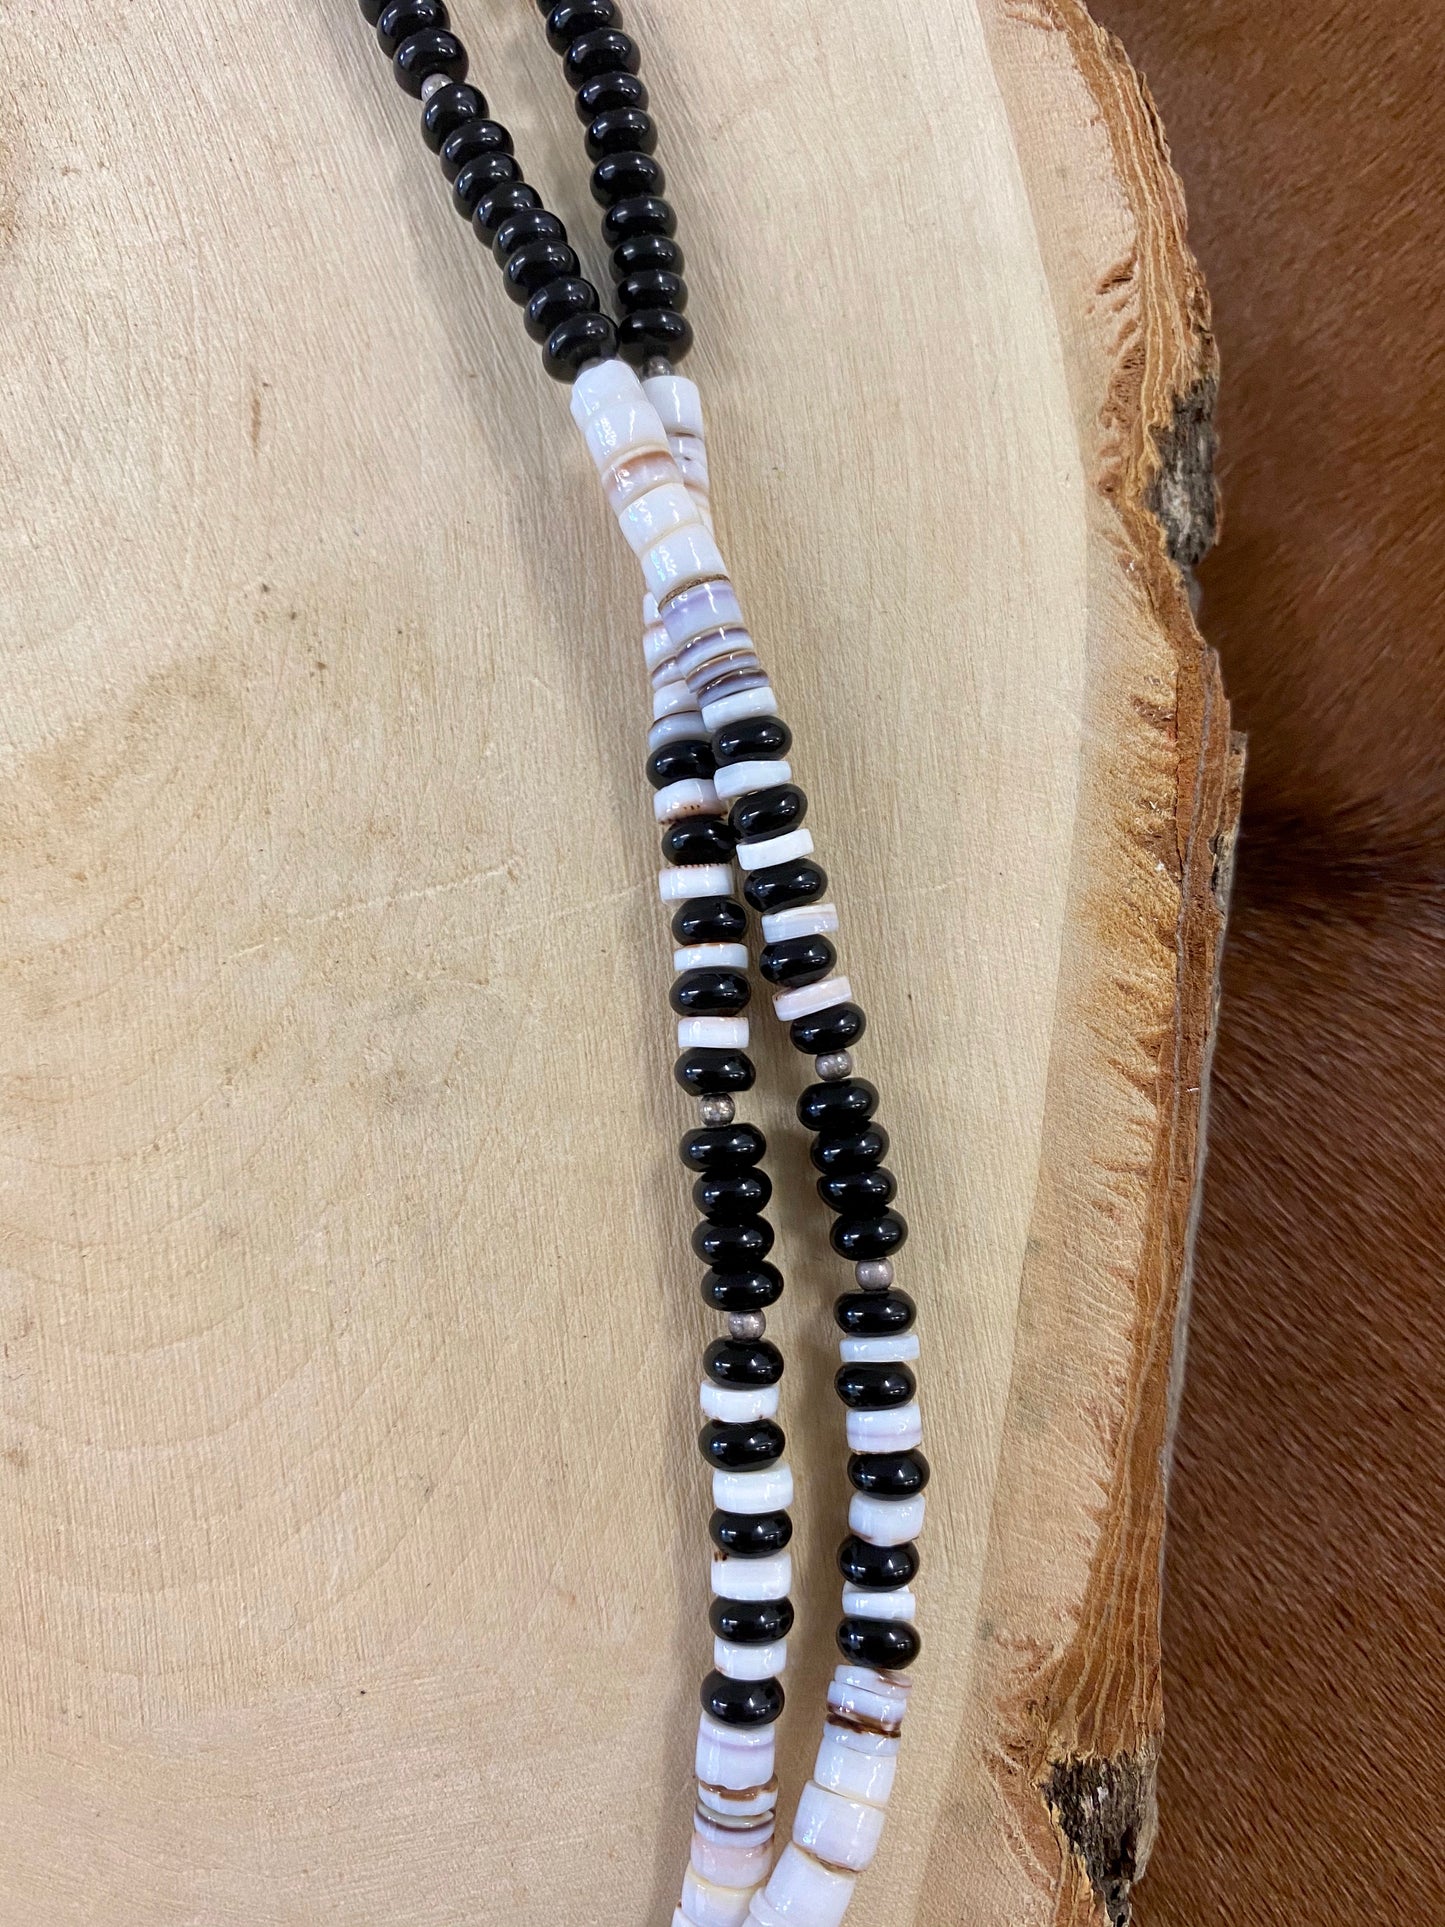 The Two Strand Onyx Necklace - Ny Texas Style Boutique 